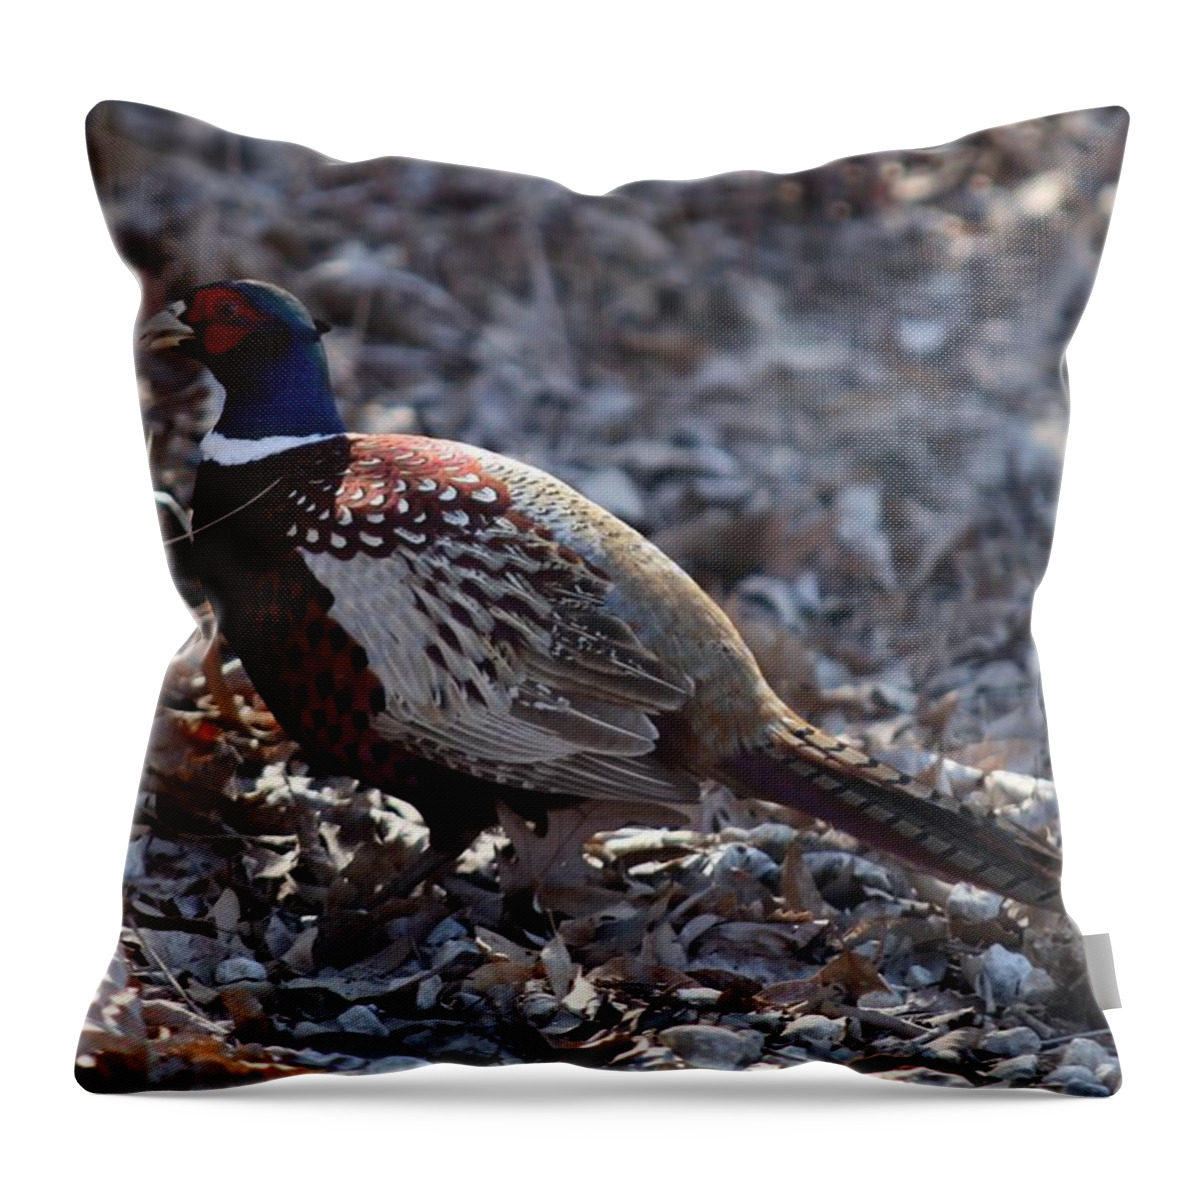 Pheasant Throw Pillow featuring the photograph Howard County Pheasant by Kathryn Cornett